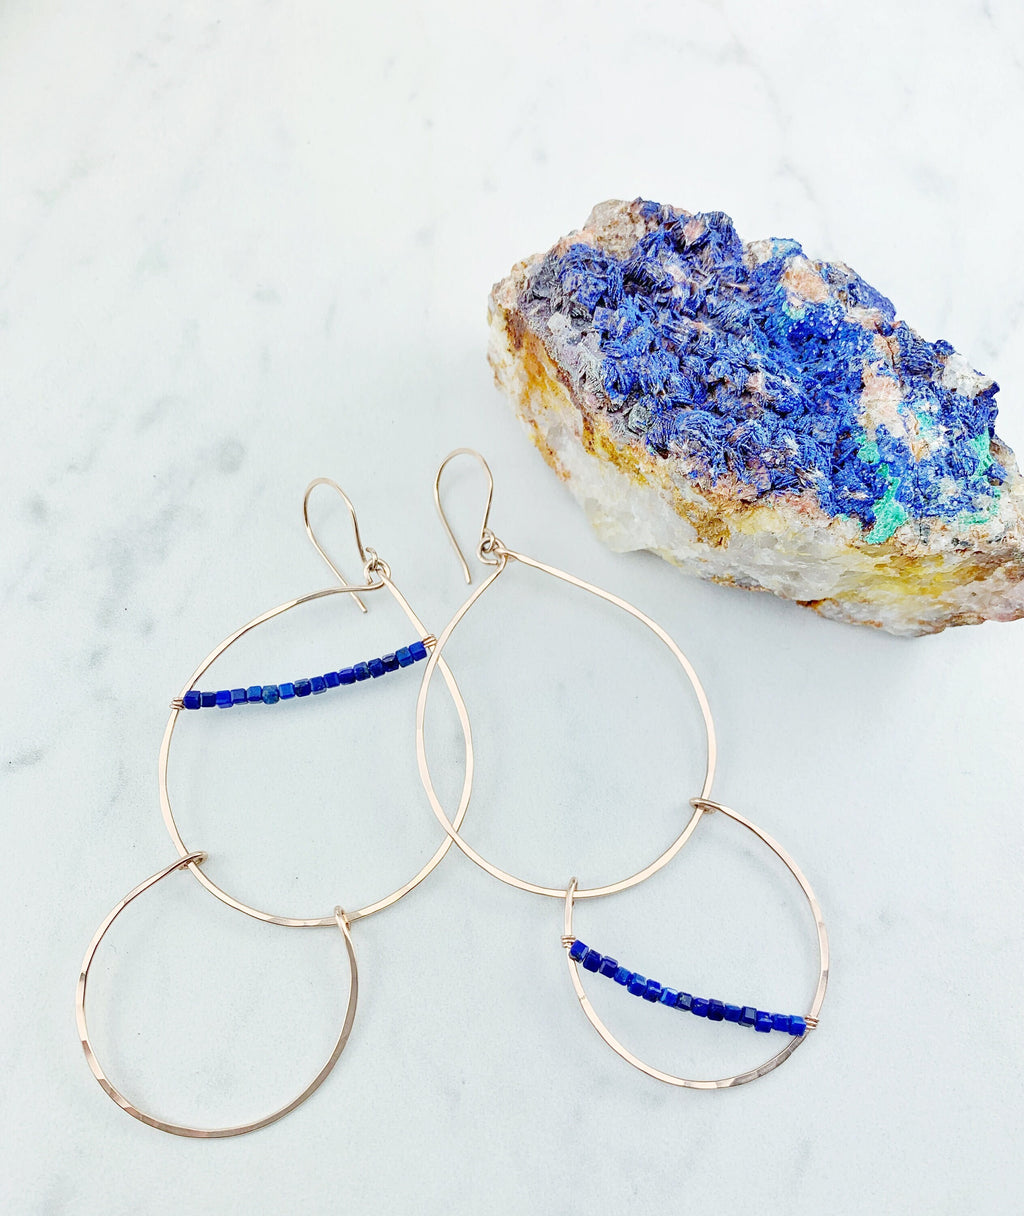 Large Gold and Lapis Teardrop Hoops, lapis earrings, teardrop earrings, boho earrings, gold earrings